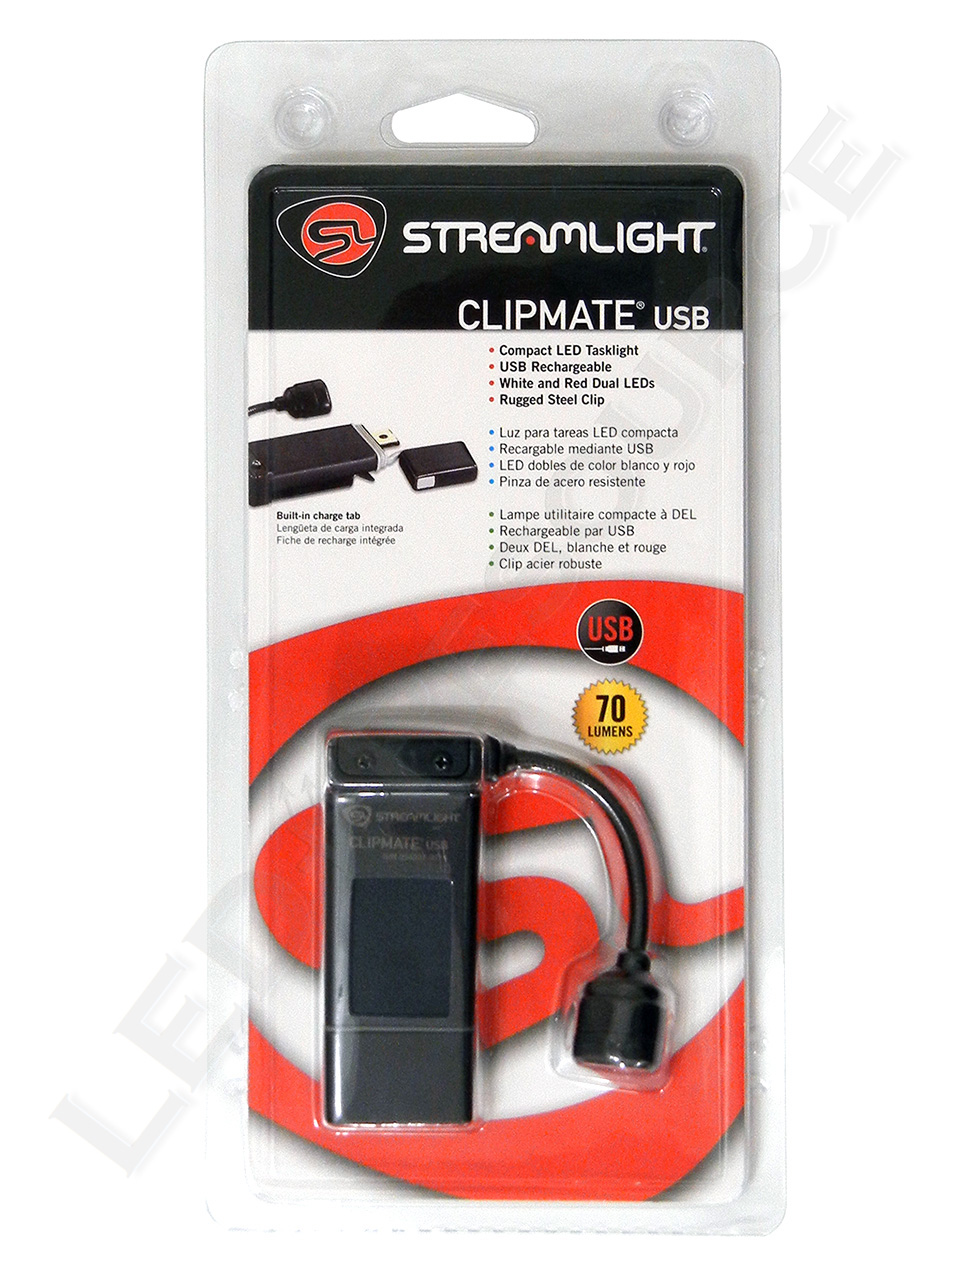 streamlight clipmate review